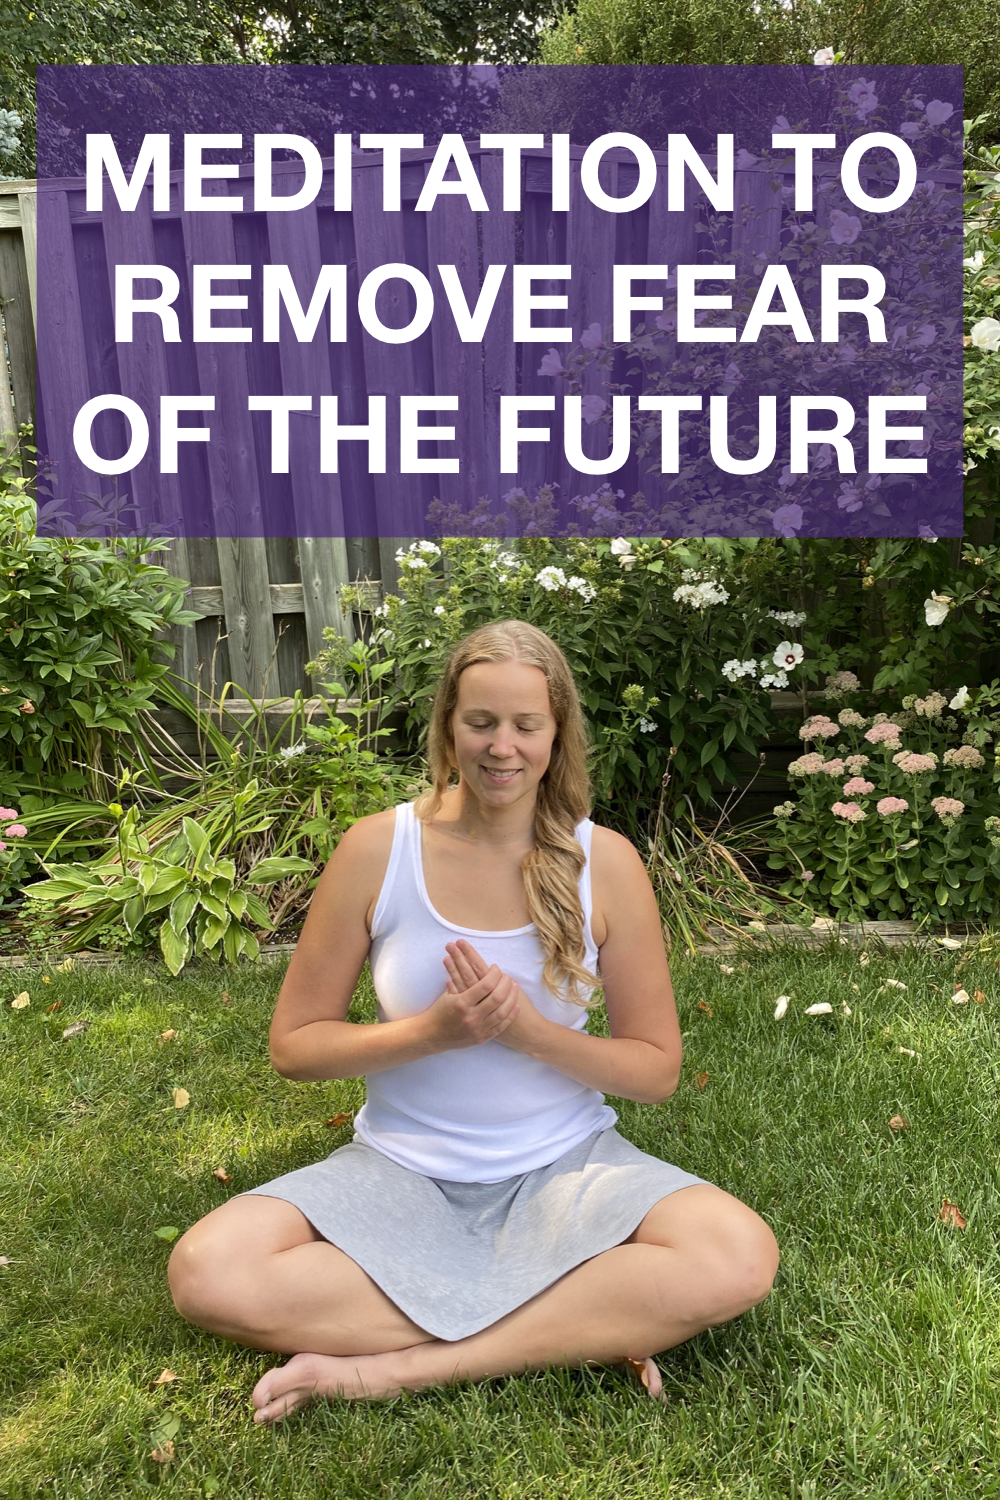 Meditation to remove fear of the future